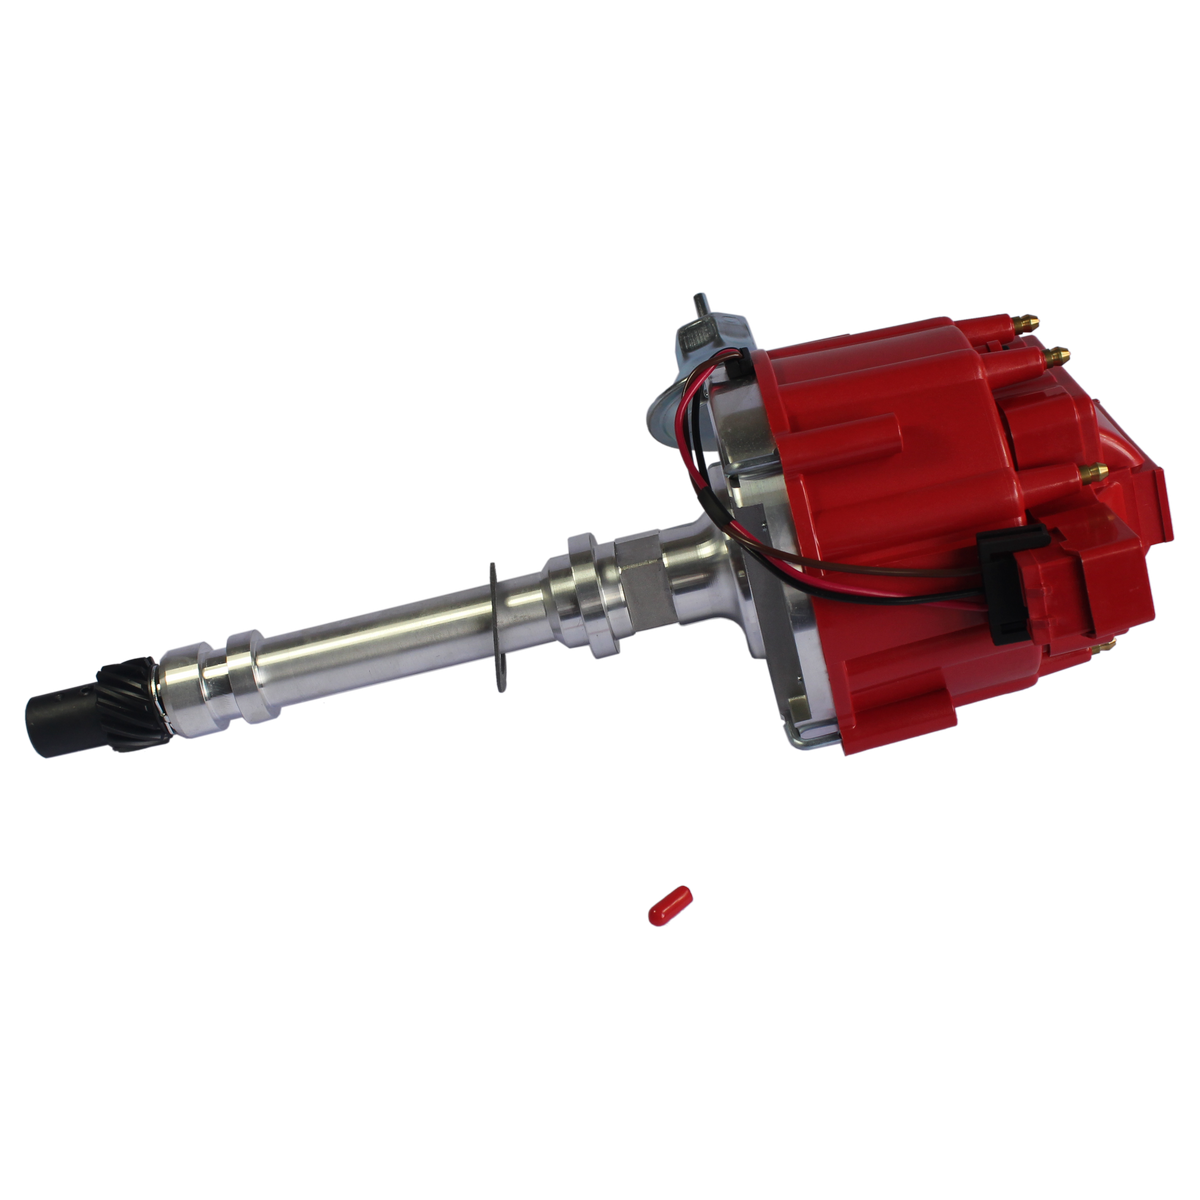 JDMSPEED High Performance Red Cap HEI Distributor For Chevy/gm